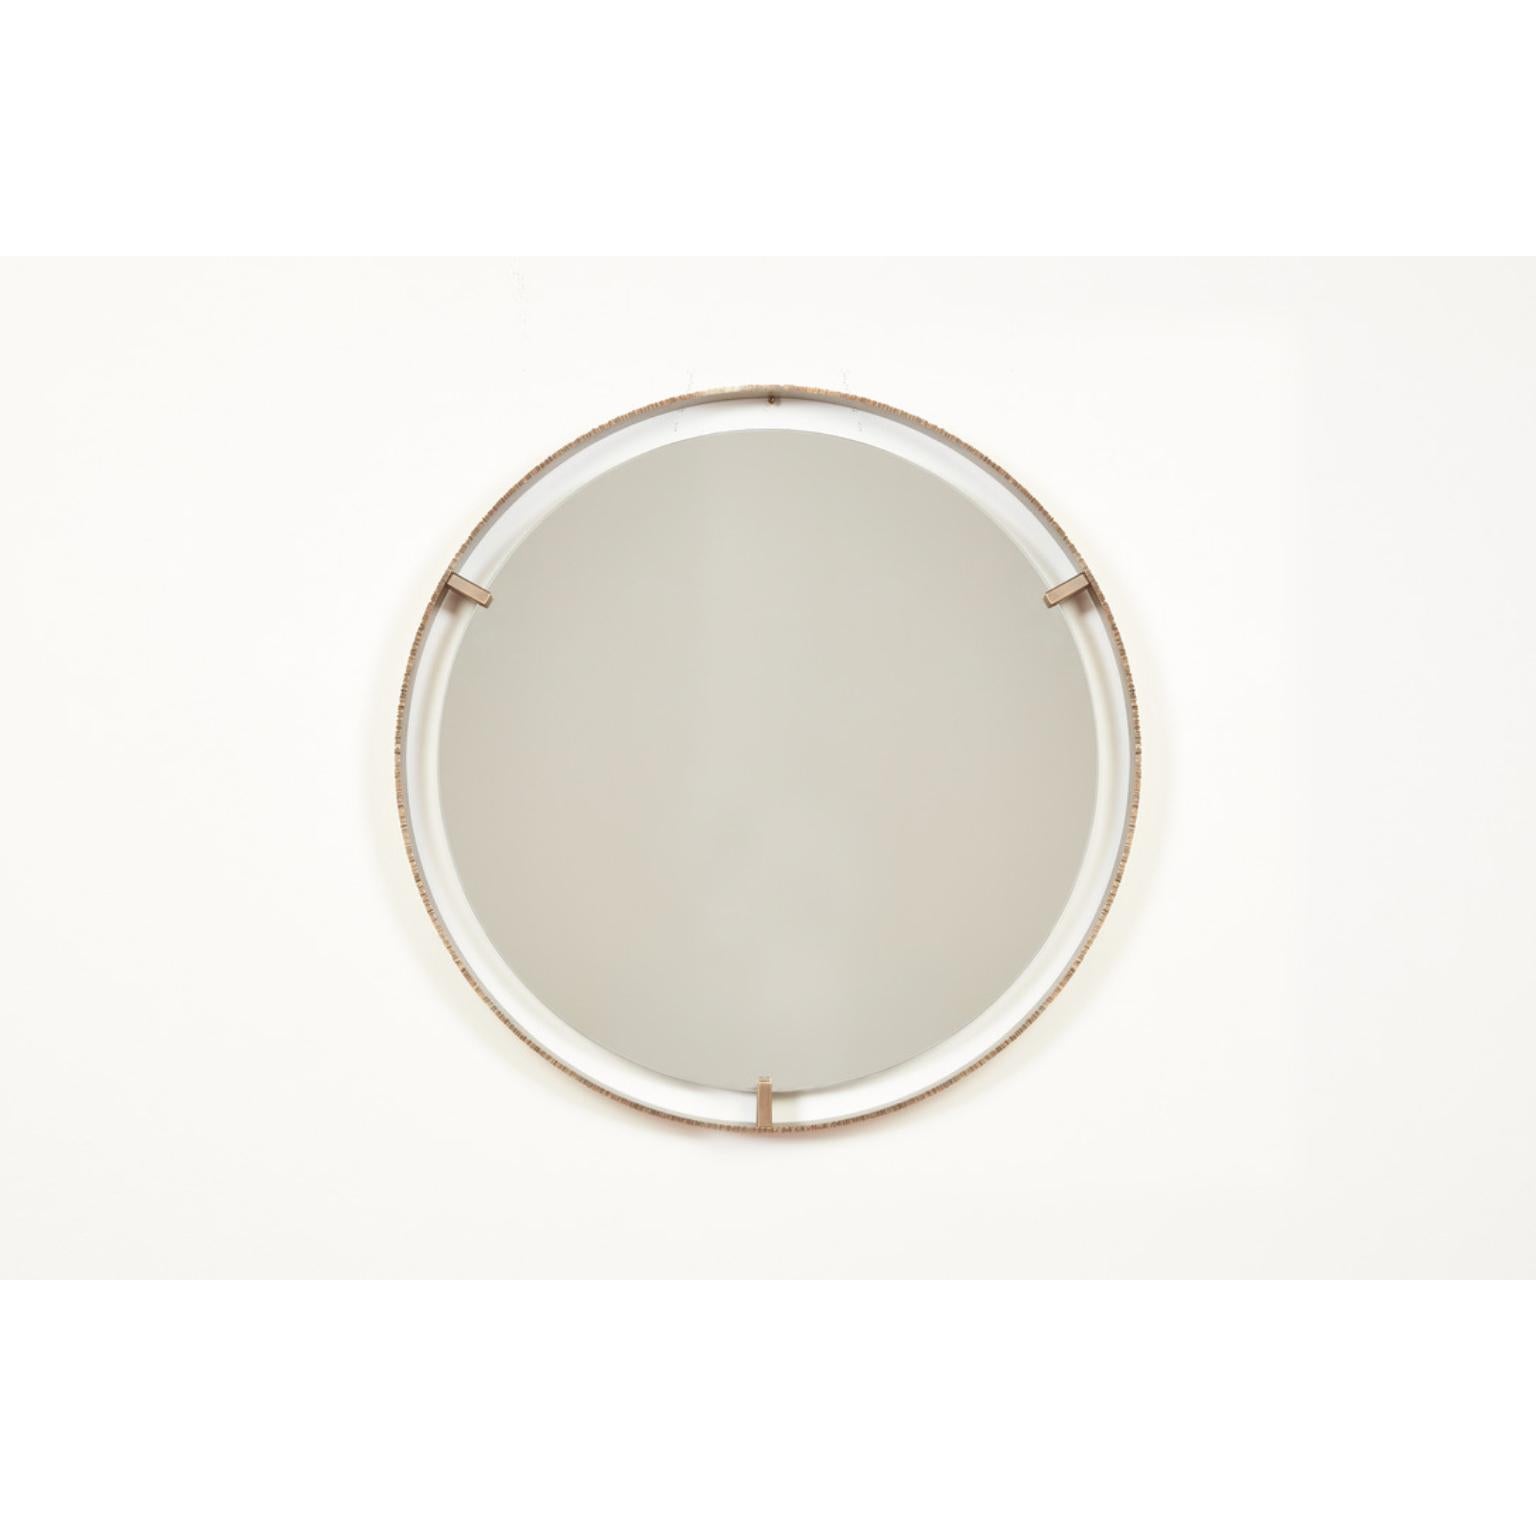 Small Circular Gauged Edge Mirror by William Emmerson
Dimensions: Ø 78,7 x D 5,1 cm.
Materials: Brass and mirror.

Also available in large (Ø 122 x D 5,1 cm). Please contact us.  
 
Introducing 